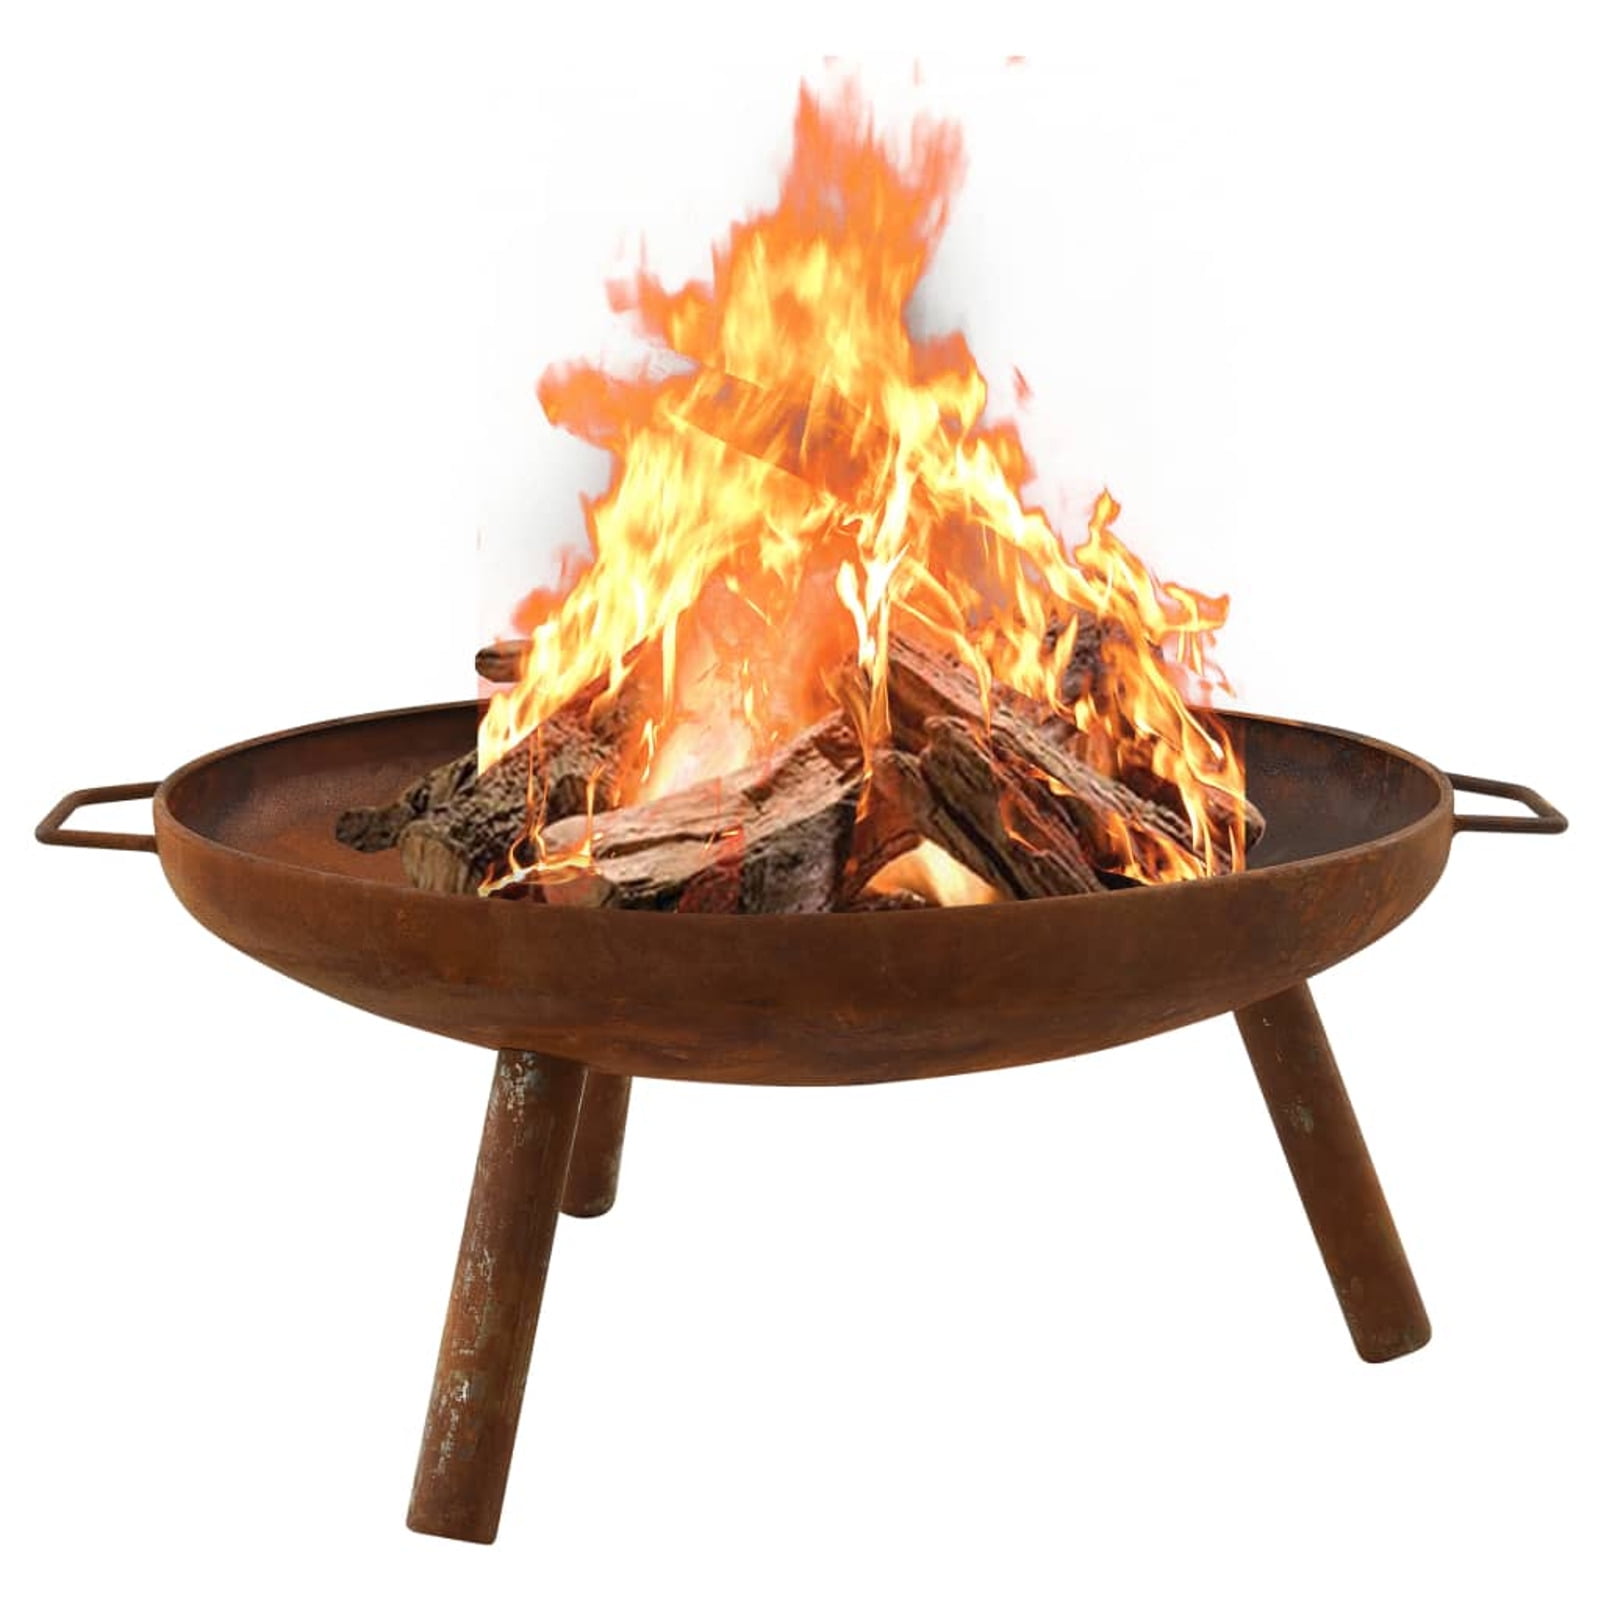 Details about   Round Fire Pit Outdoor Wood Burning Firepit Stove 28 Inch Diam Antique Bronze 